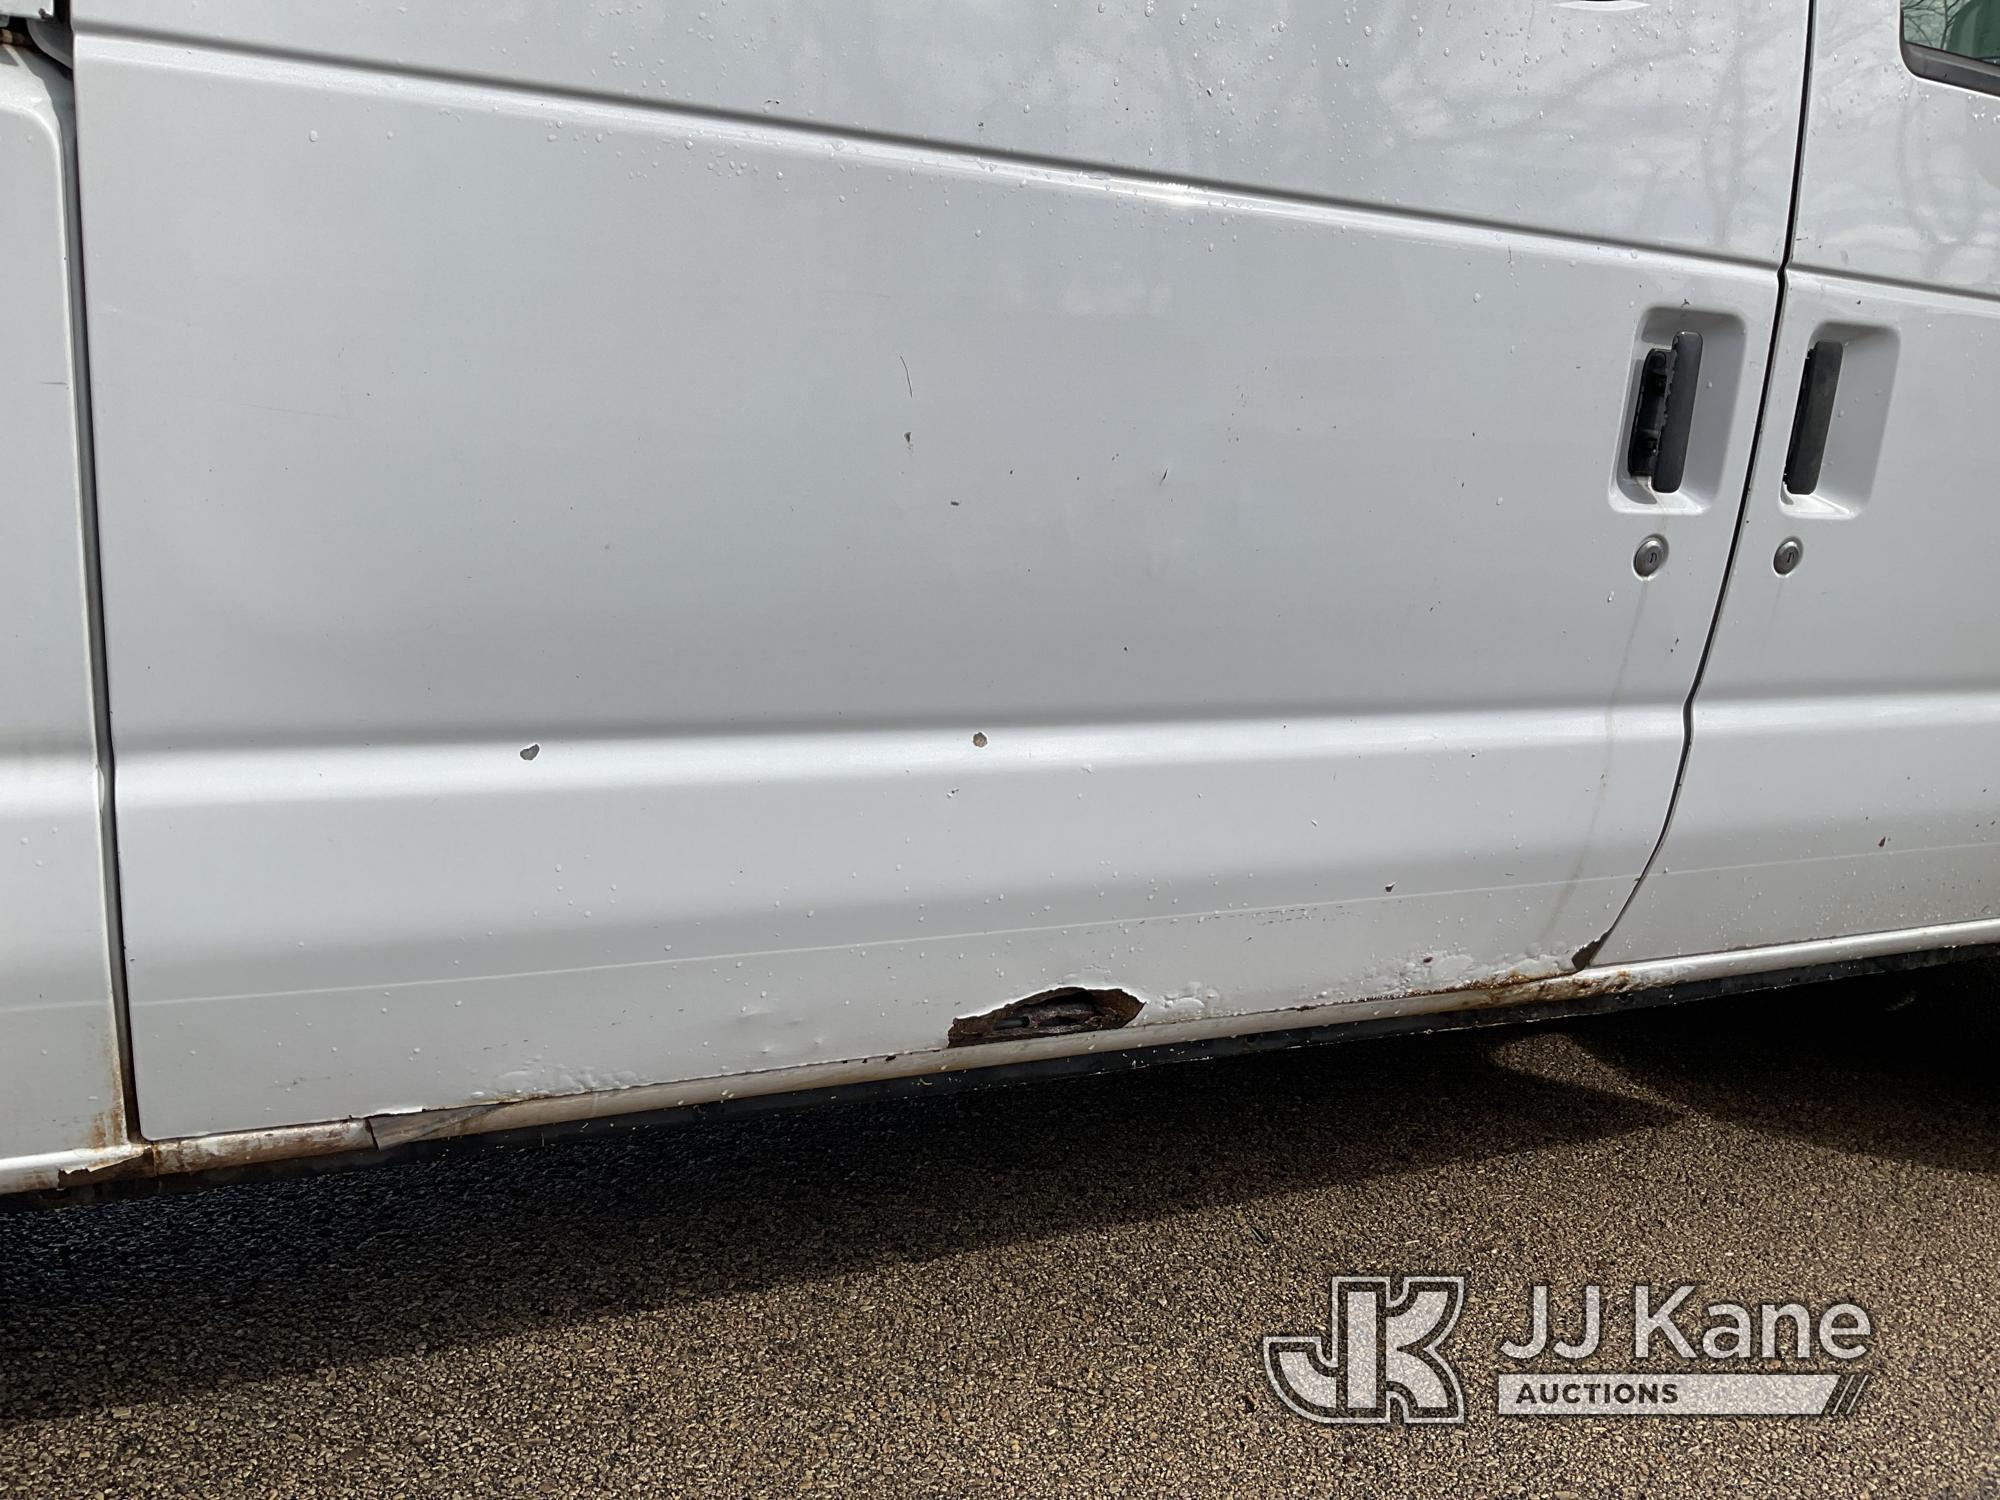 (Neenah, WI) 2013 Ford E150 Cargo Van Runs & Moves) (Rust and Body Damage-refer to photos, Cracked W